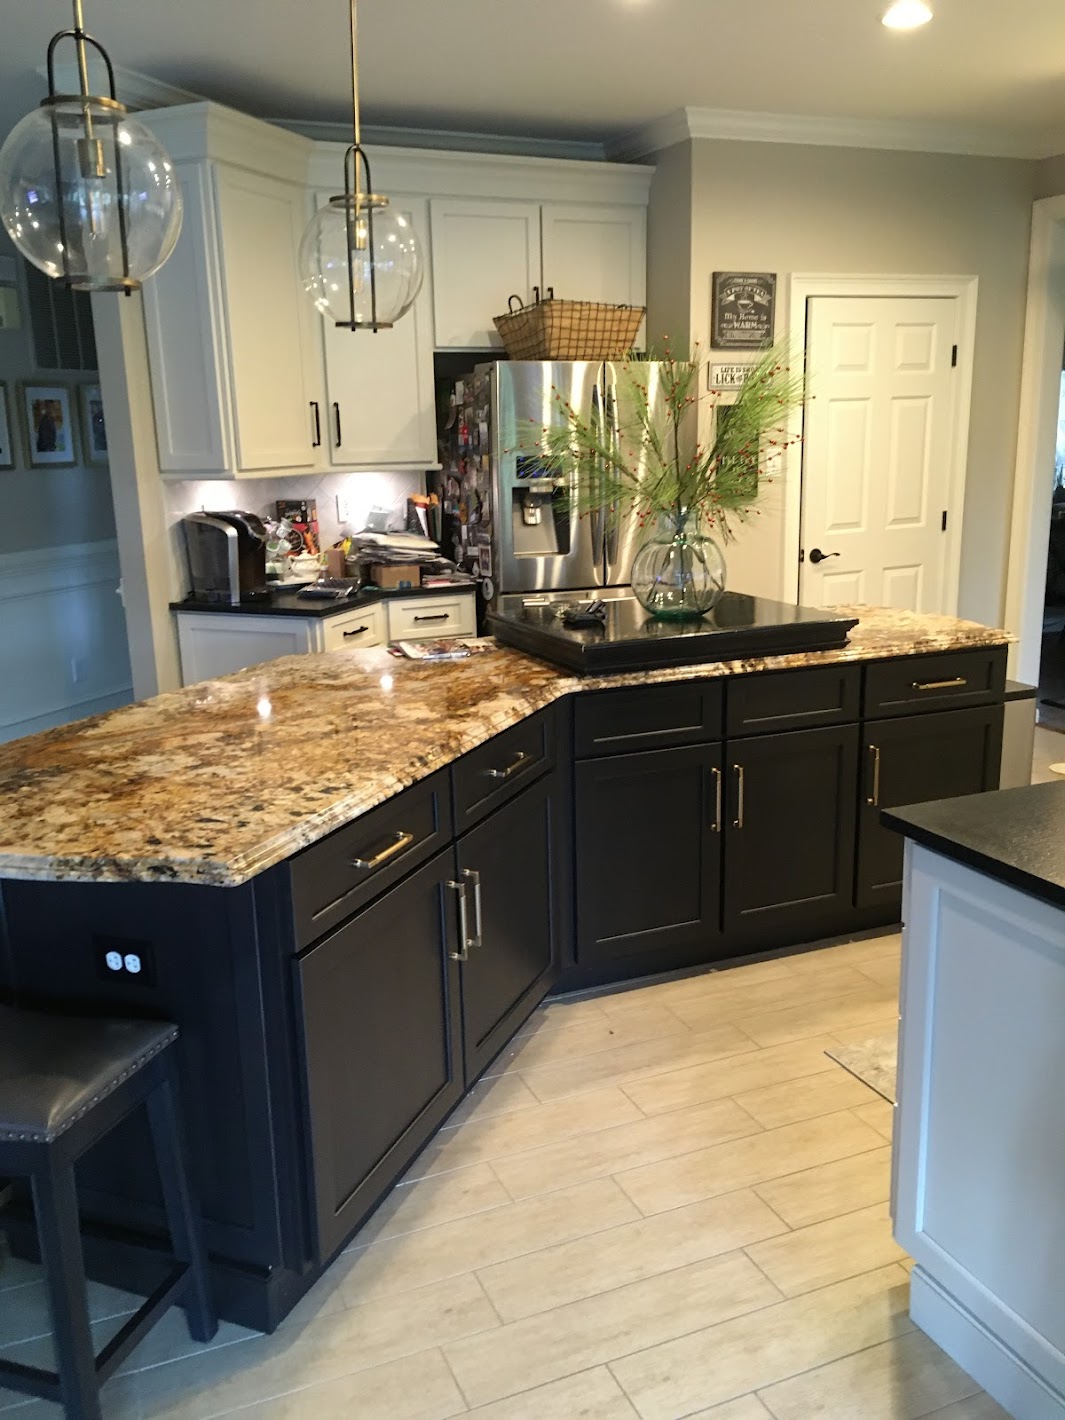 A beautiful contrast was created when this custom kitchen cabinet refacing was completed with the main cabinetry in a white paint finish and the island alternatively finished with a dark stain.